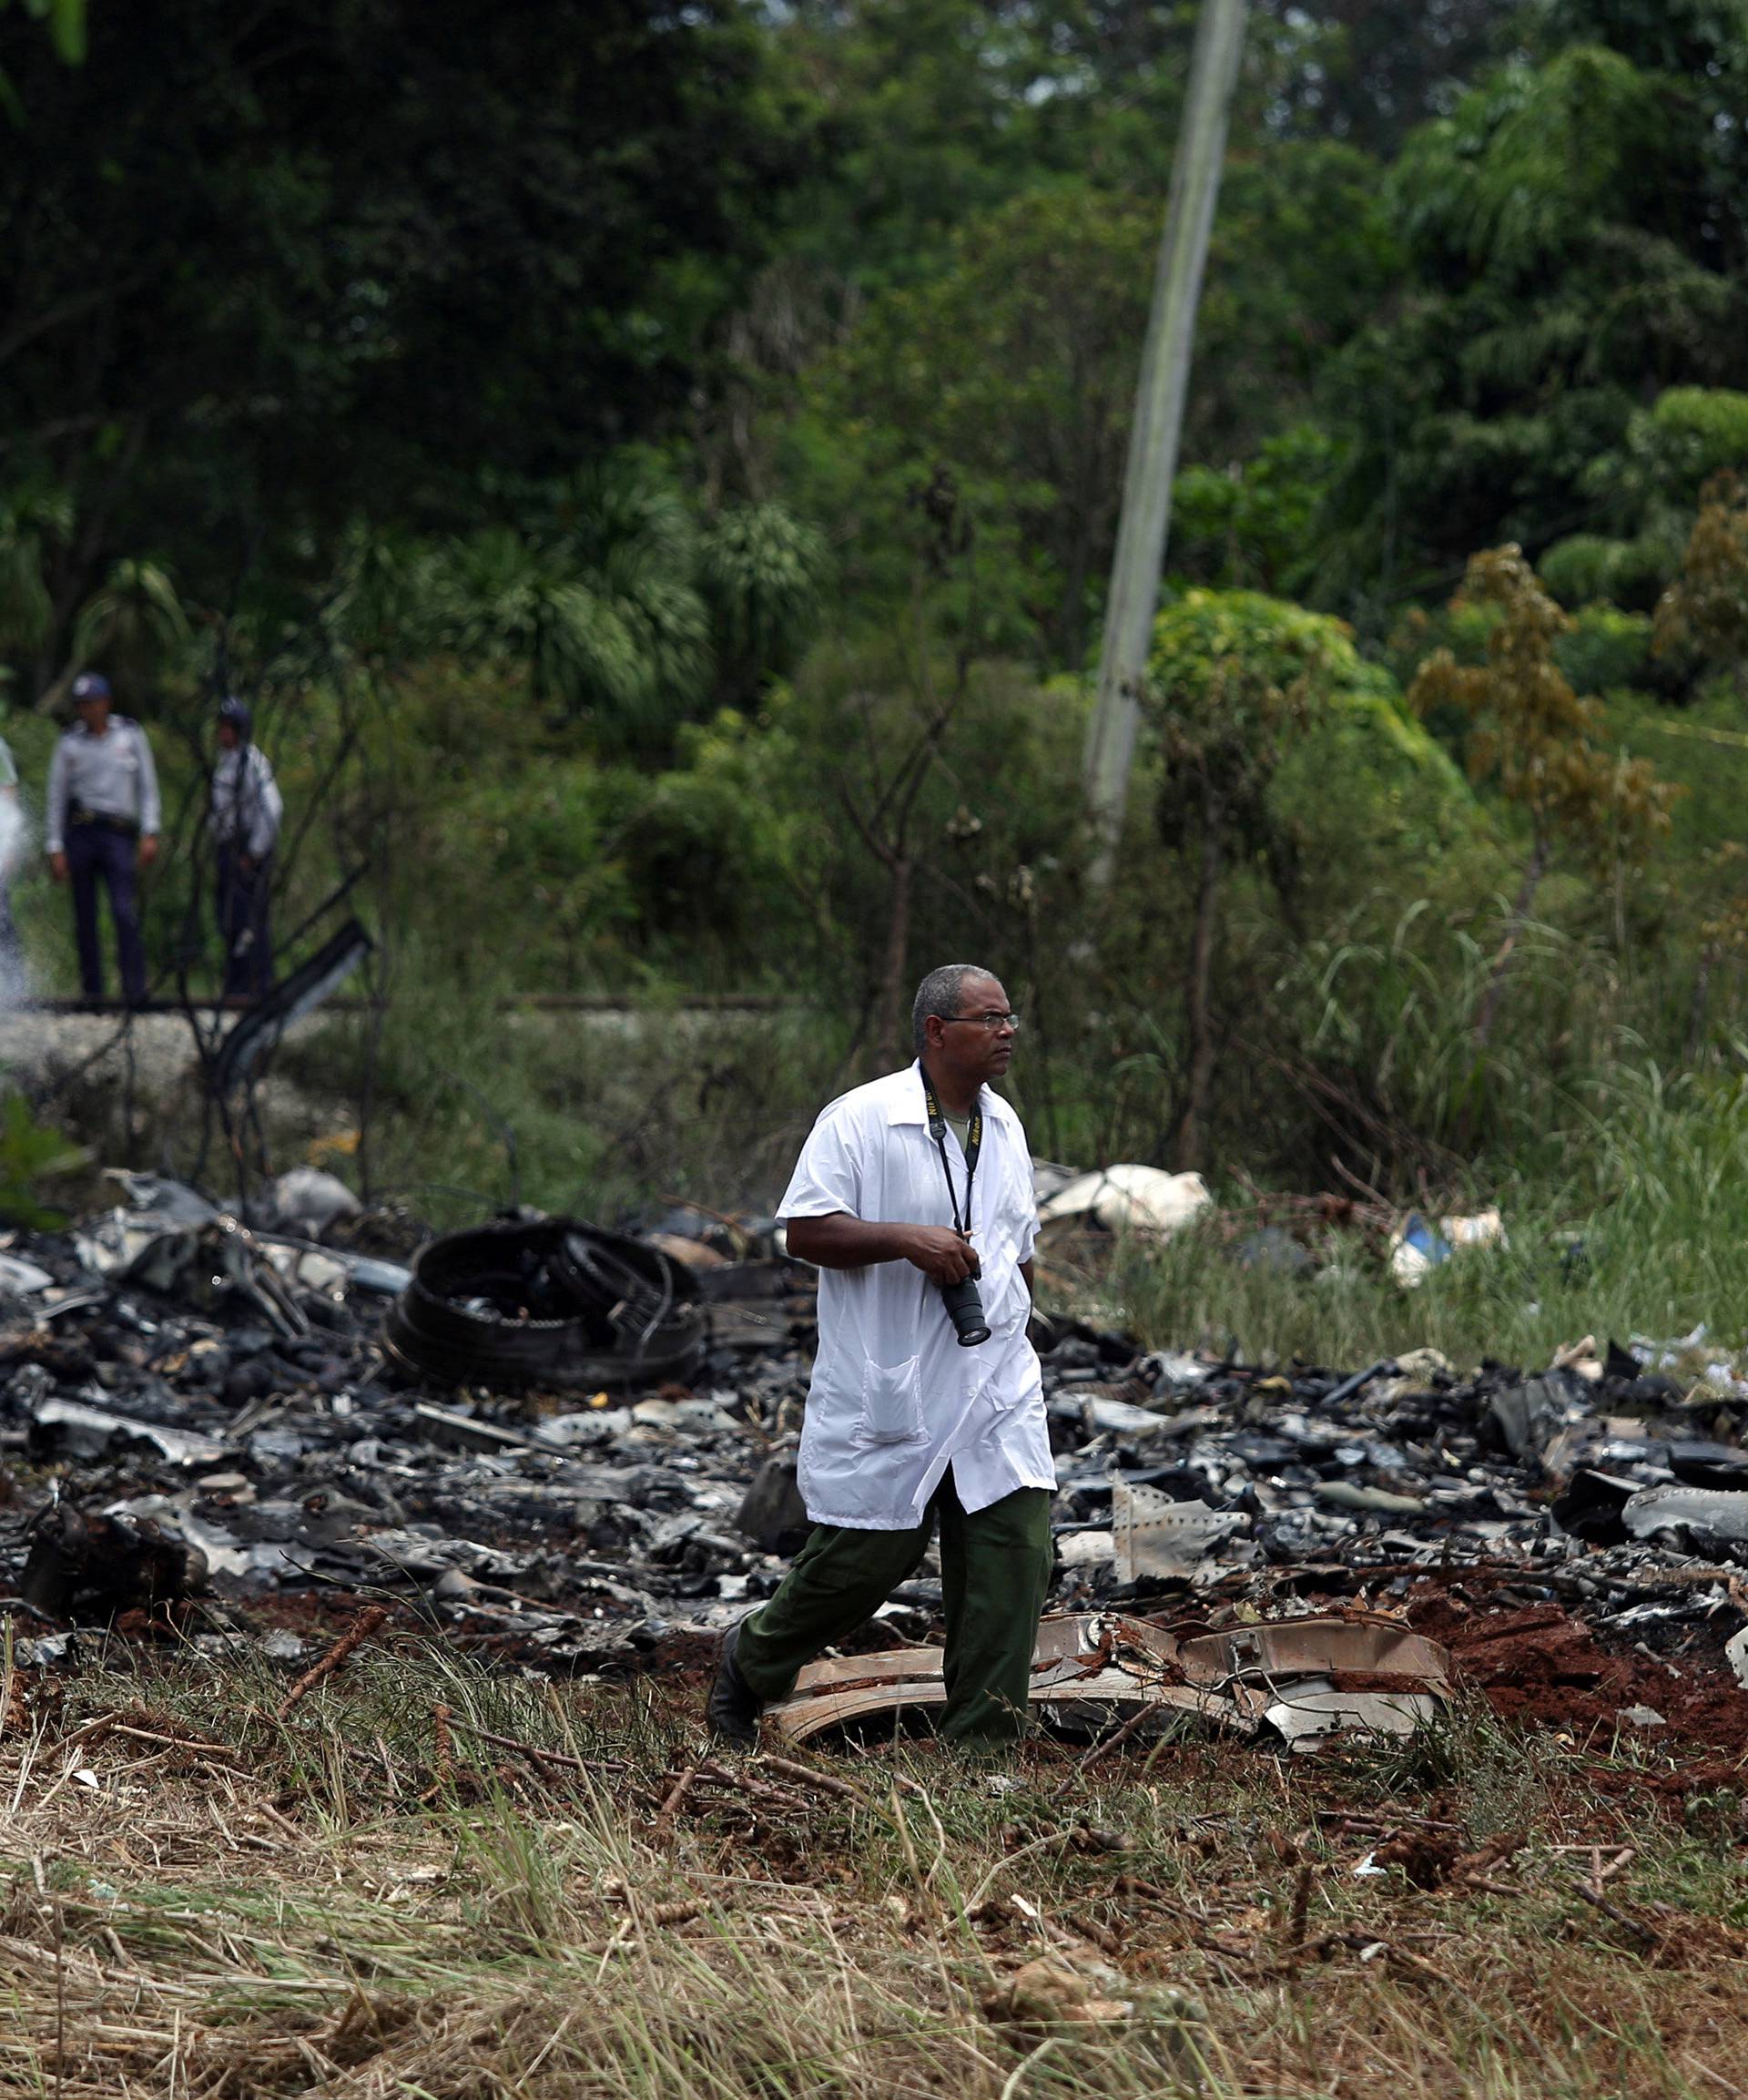 Rescue team members work in the wreckage of a Boeing 737 plane that crashed in the agricultural area of Boyeros